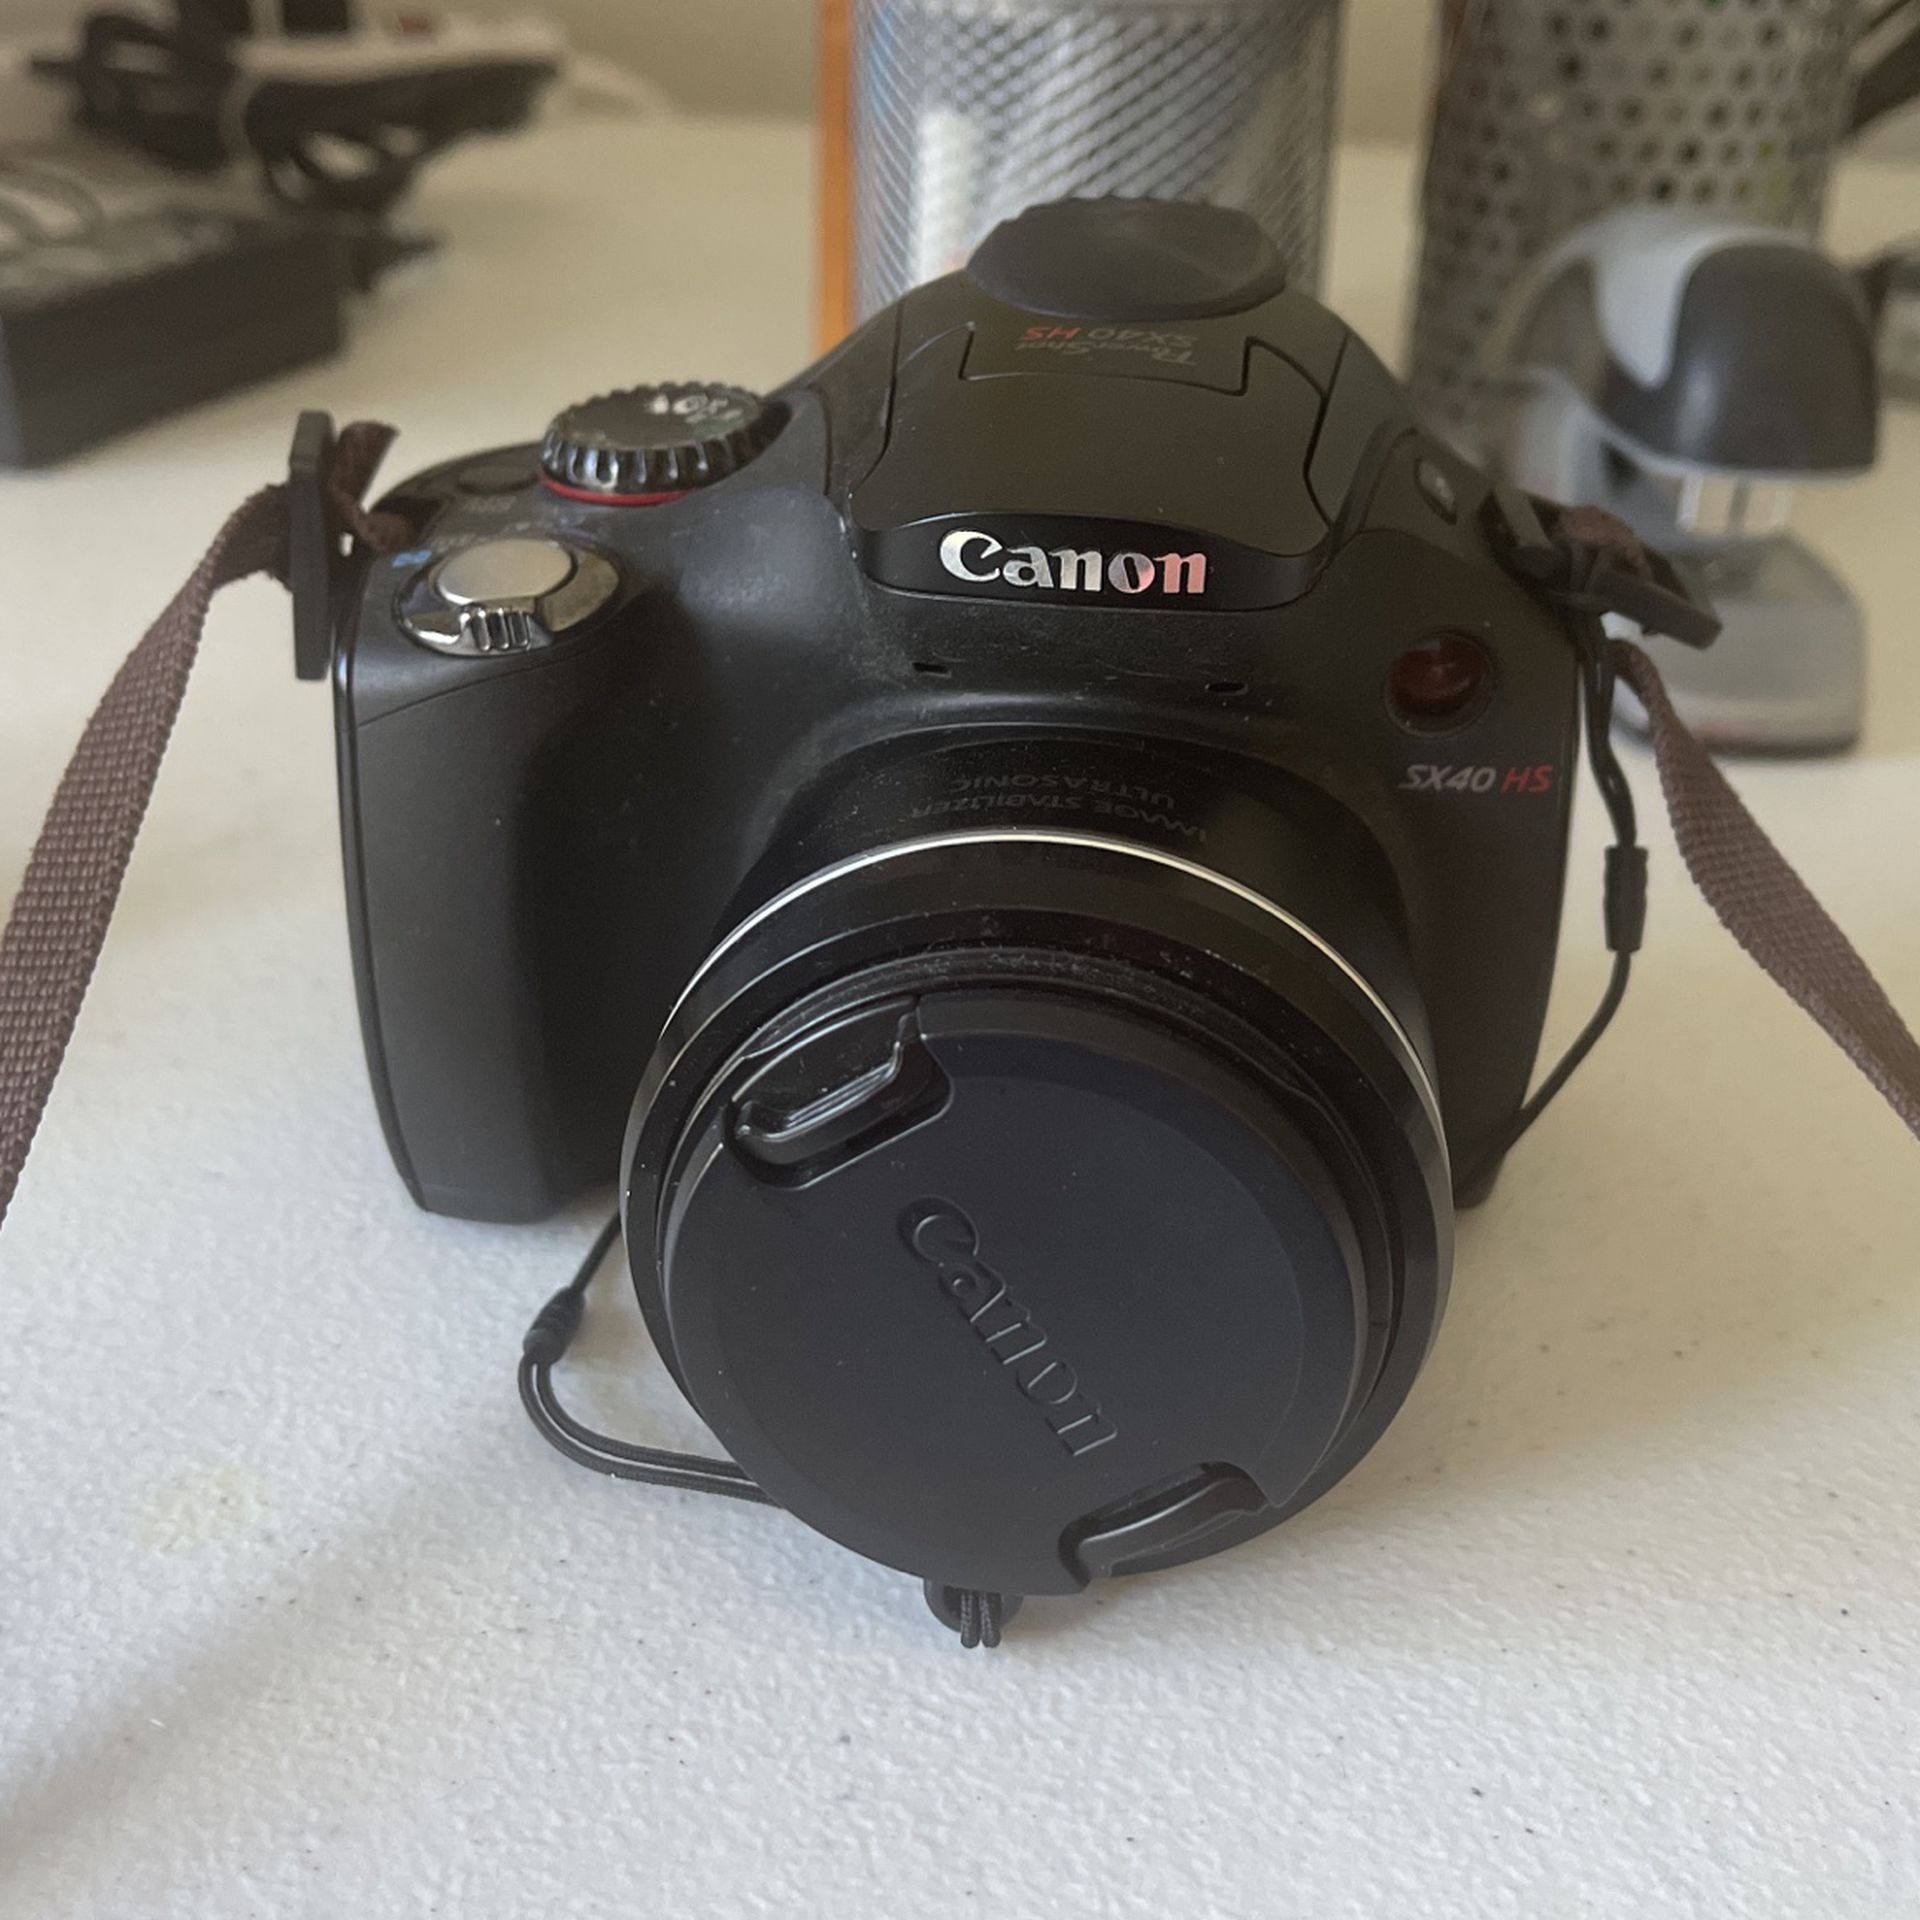 Canon SX 40 HD Powershot for Sale in Fort Lauderdale, FL - OfferUp